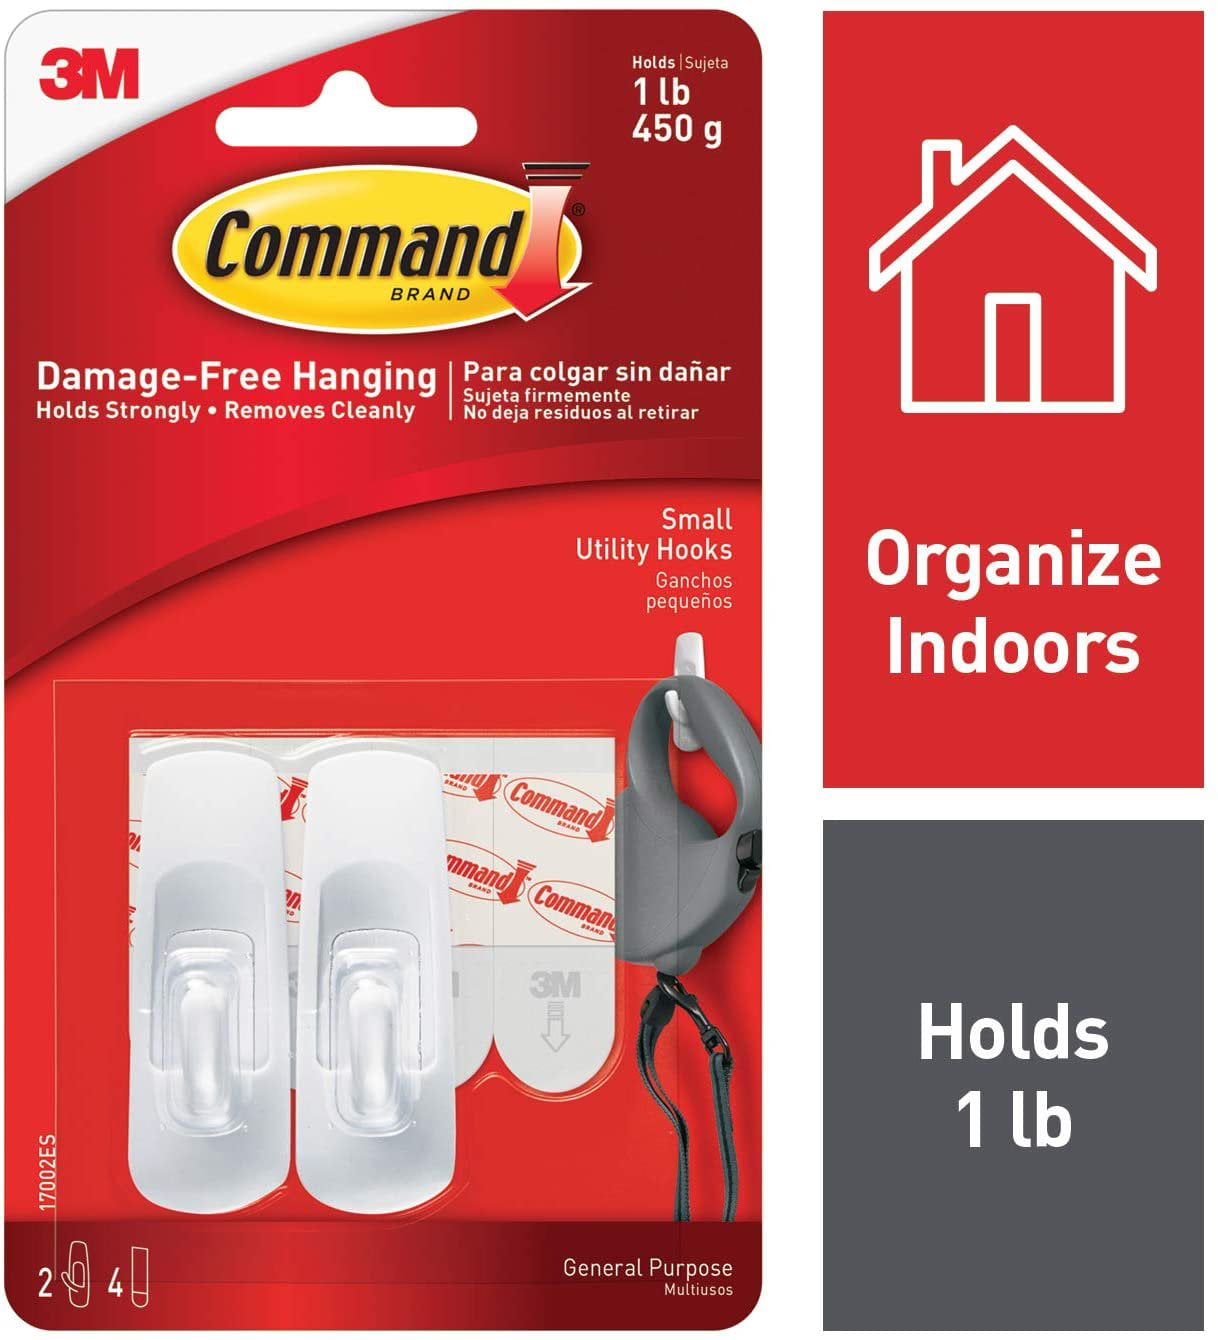 3M Command Damage Free Small Metal Hook Bright Chrome Finish Holds up to 450g